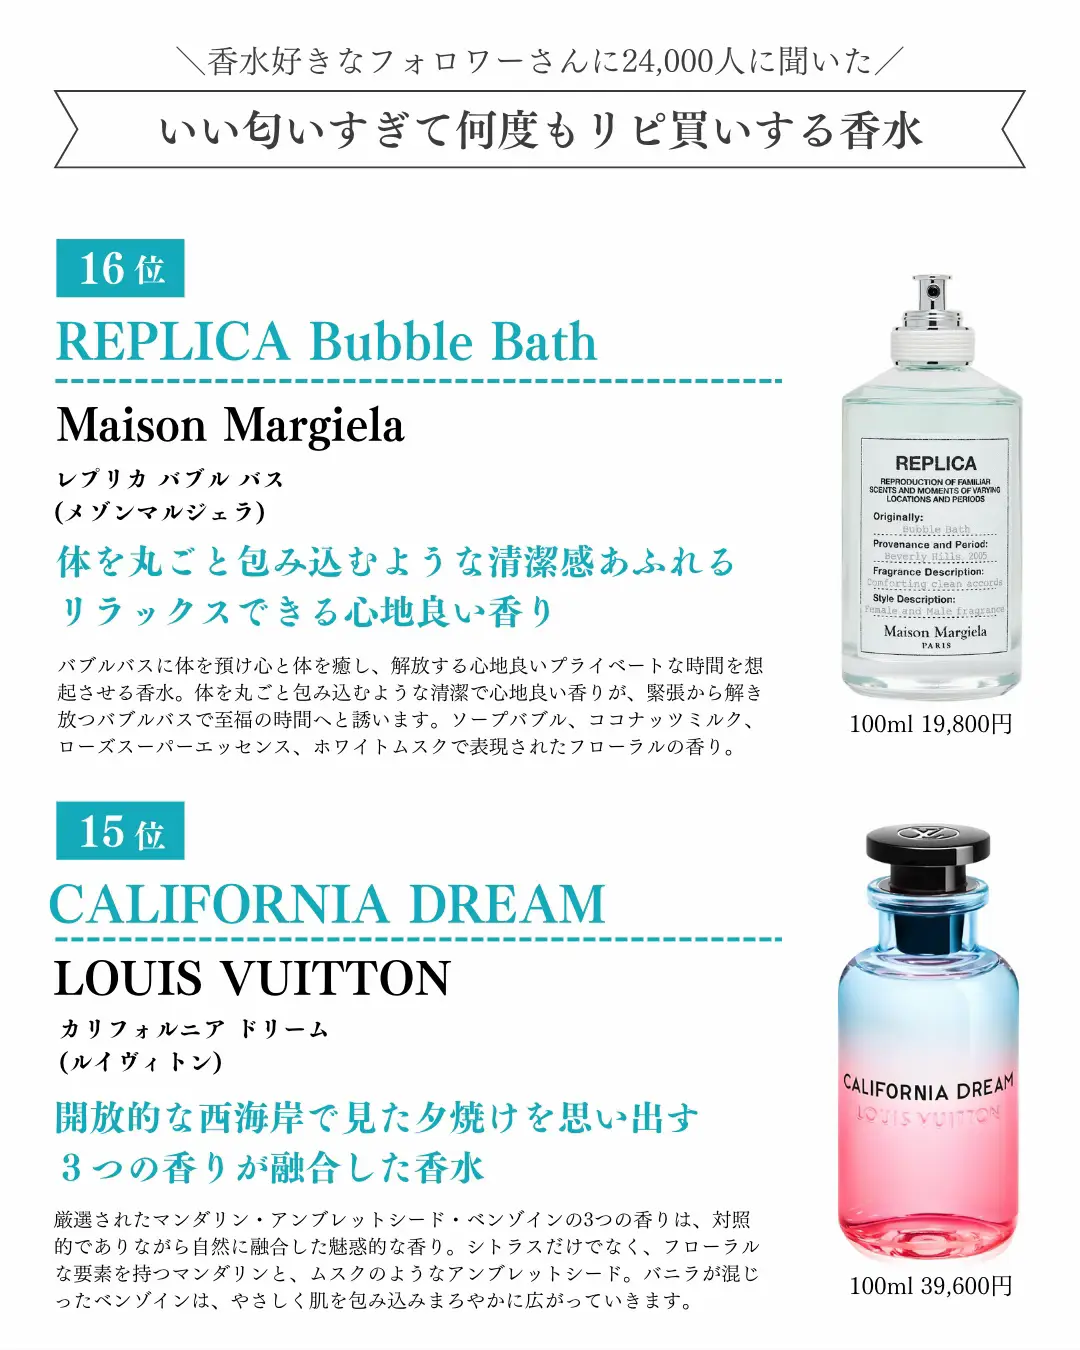 Reply purchase perfume] 20 perfumes that smell too good and buy many times  PART 1👑, Gallery posted by こうすい男子【香水・香り】